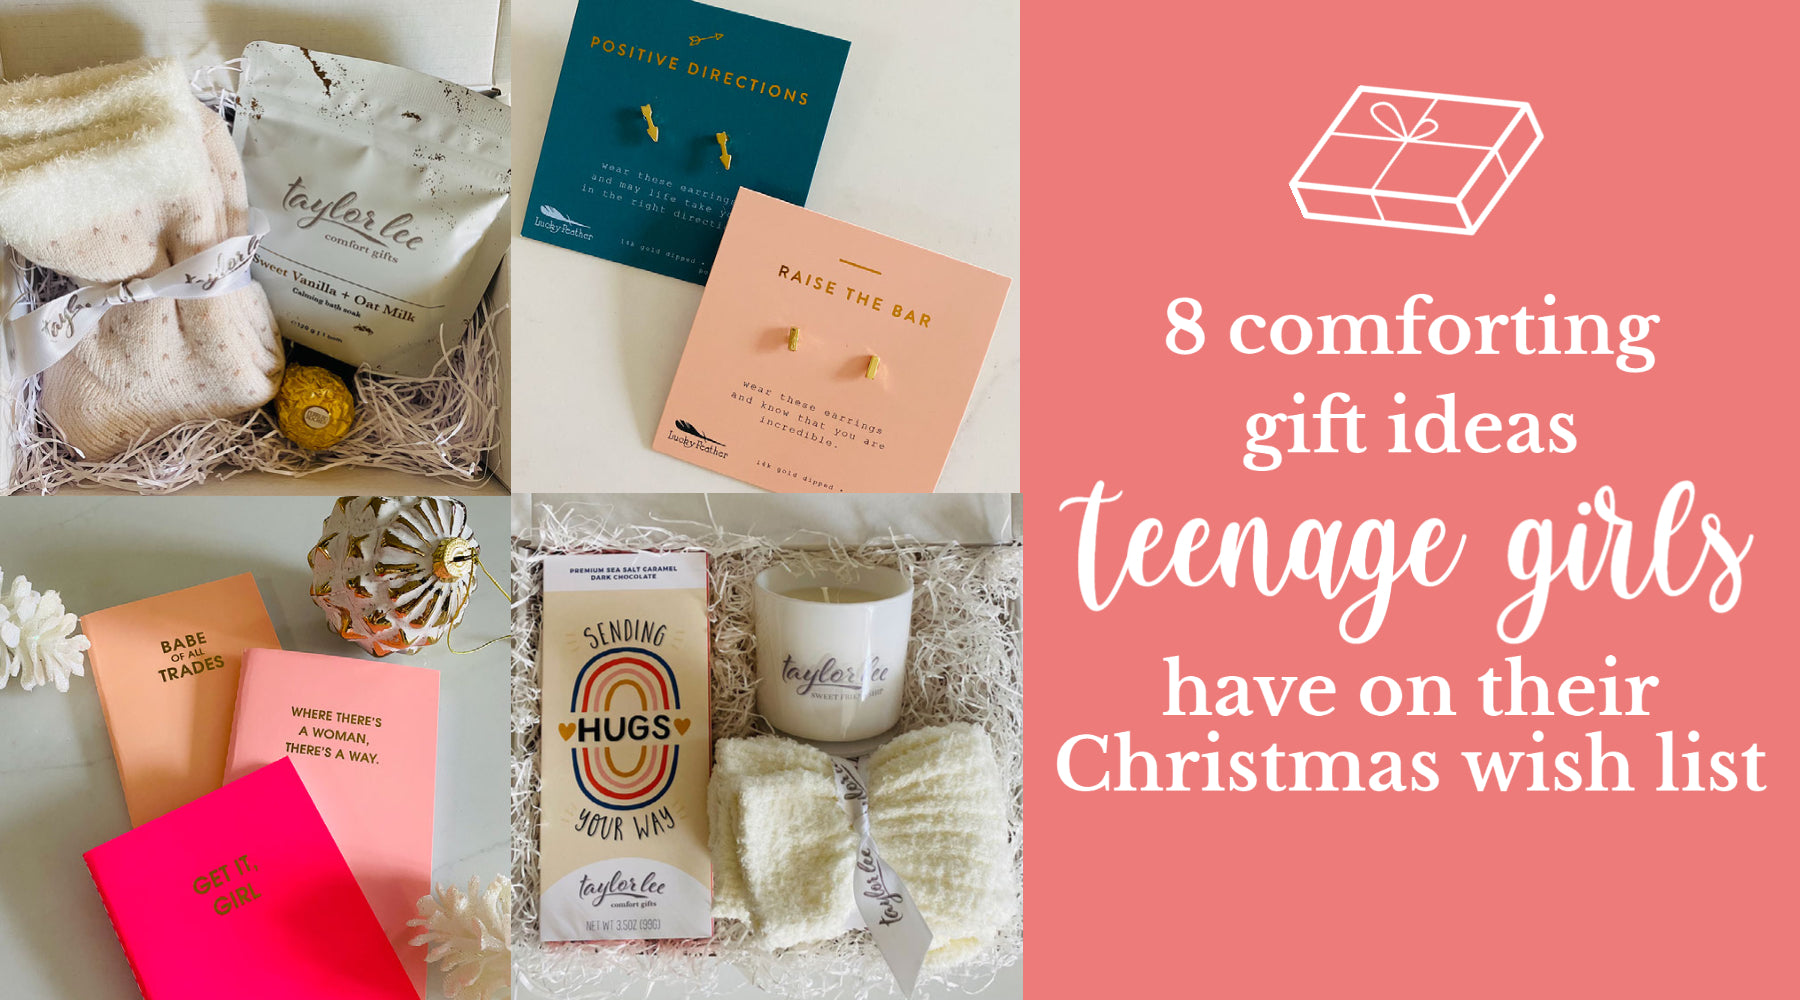 The Best Gifts for Teen Girls • Holiday Gift Guide